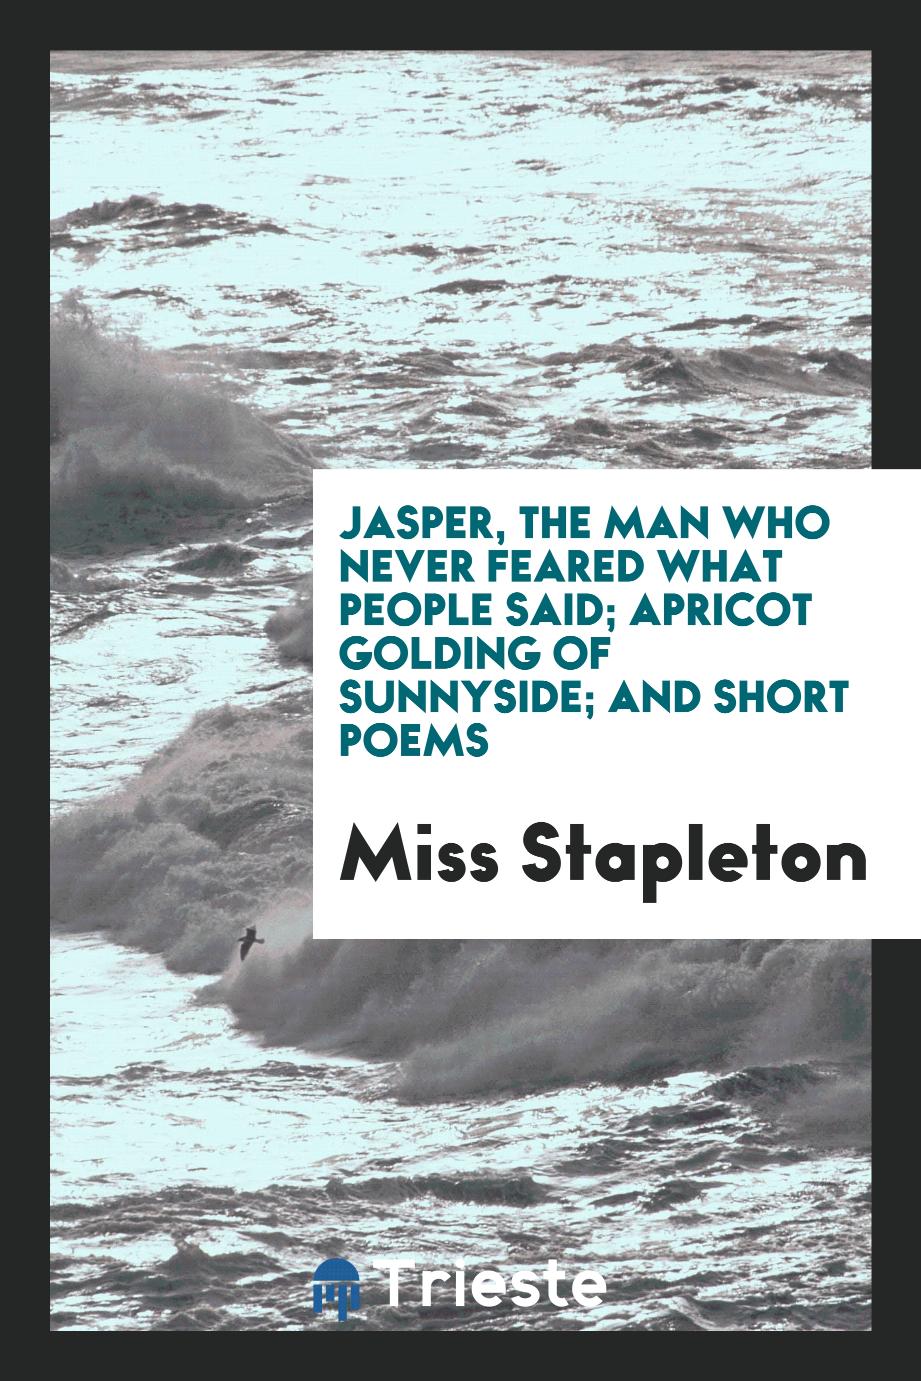 Jasper, the Man Who Never Feared What People Said; Apricot Golding of Sunnyside; And Short Poems